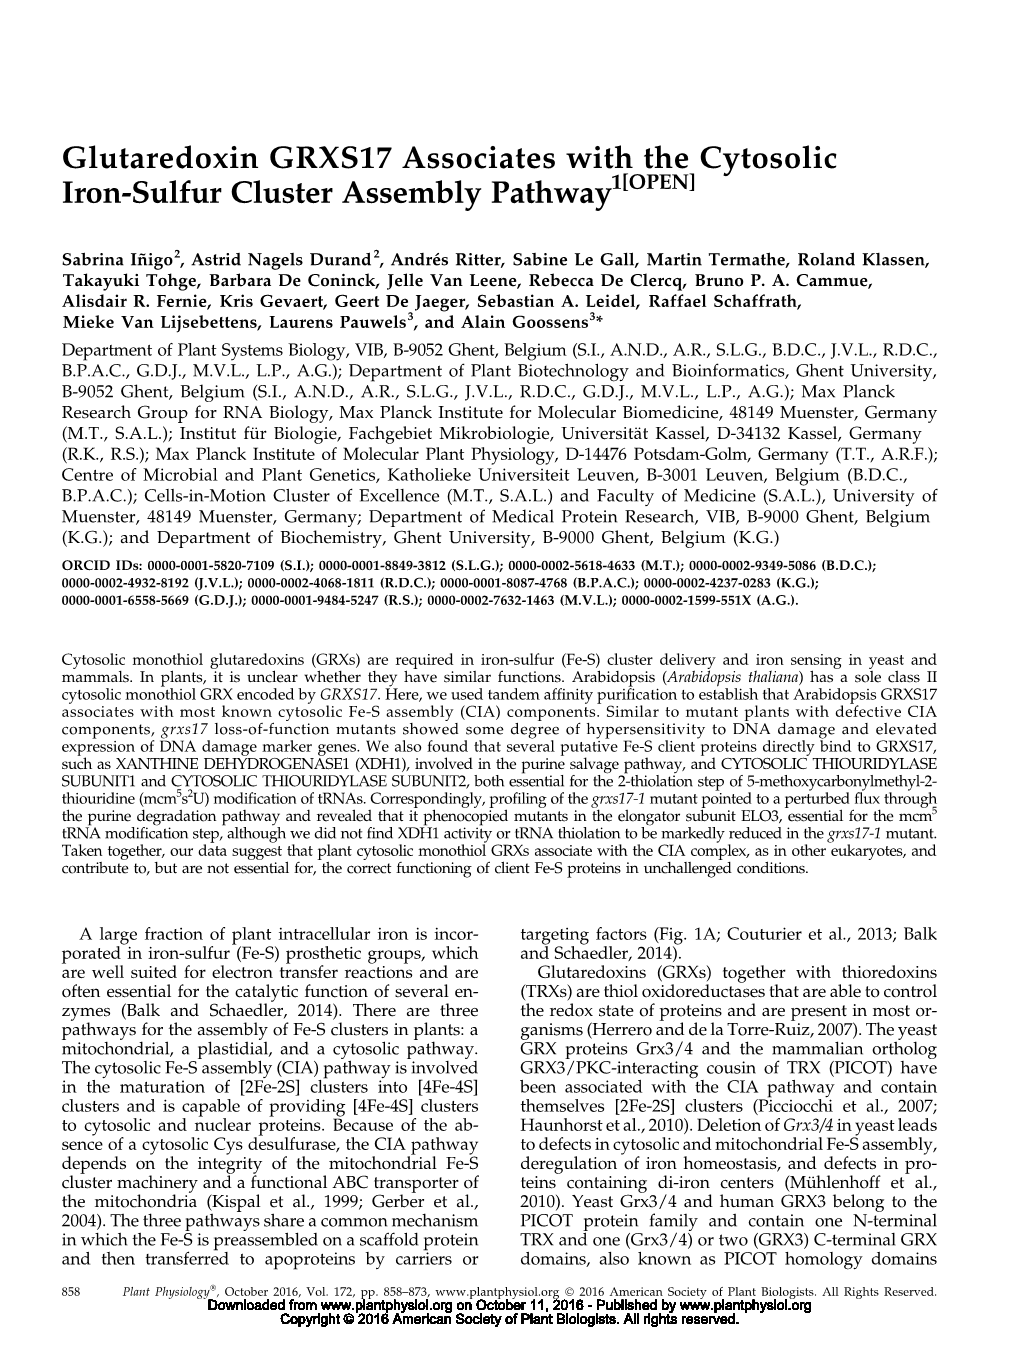 Glutaredoxin GRXS17 Associates with the Cytosolic Iron-Sulfur Cluster Assembly Pathway1[OPEN]